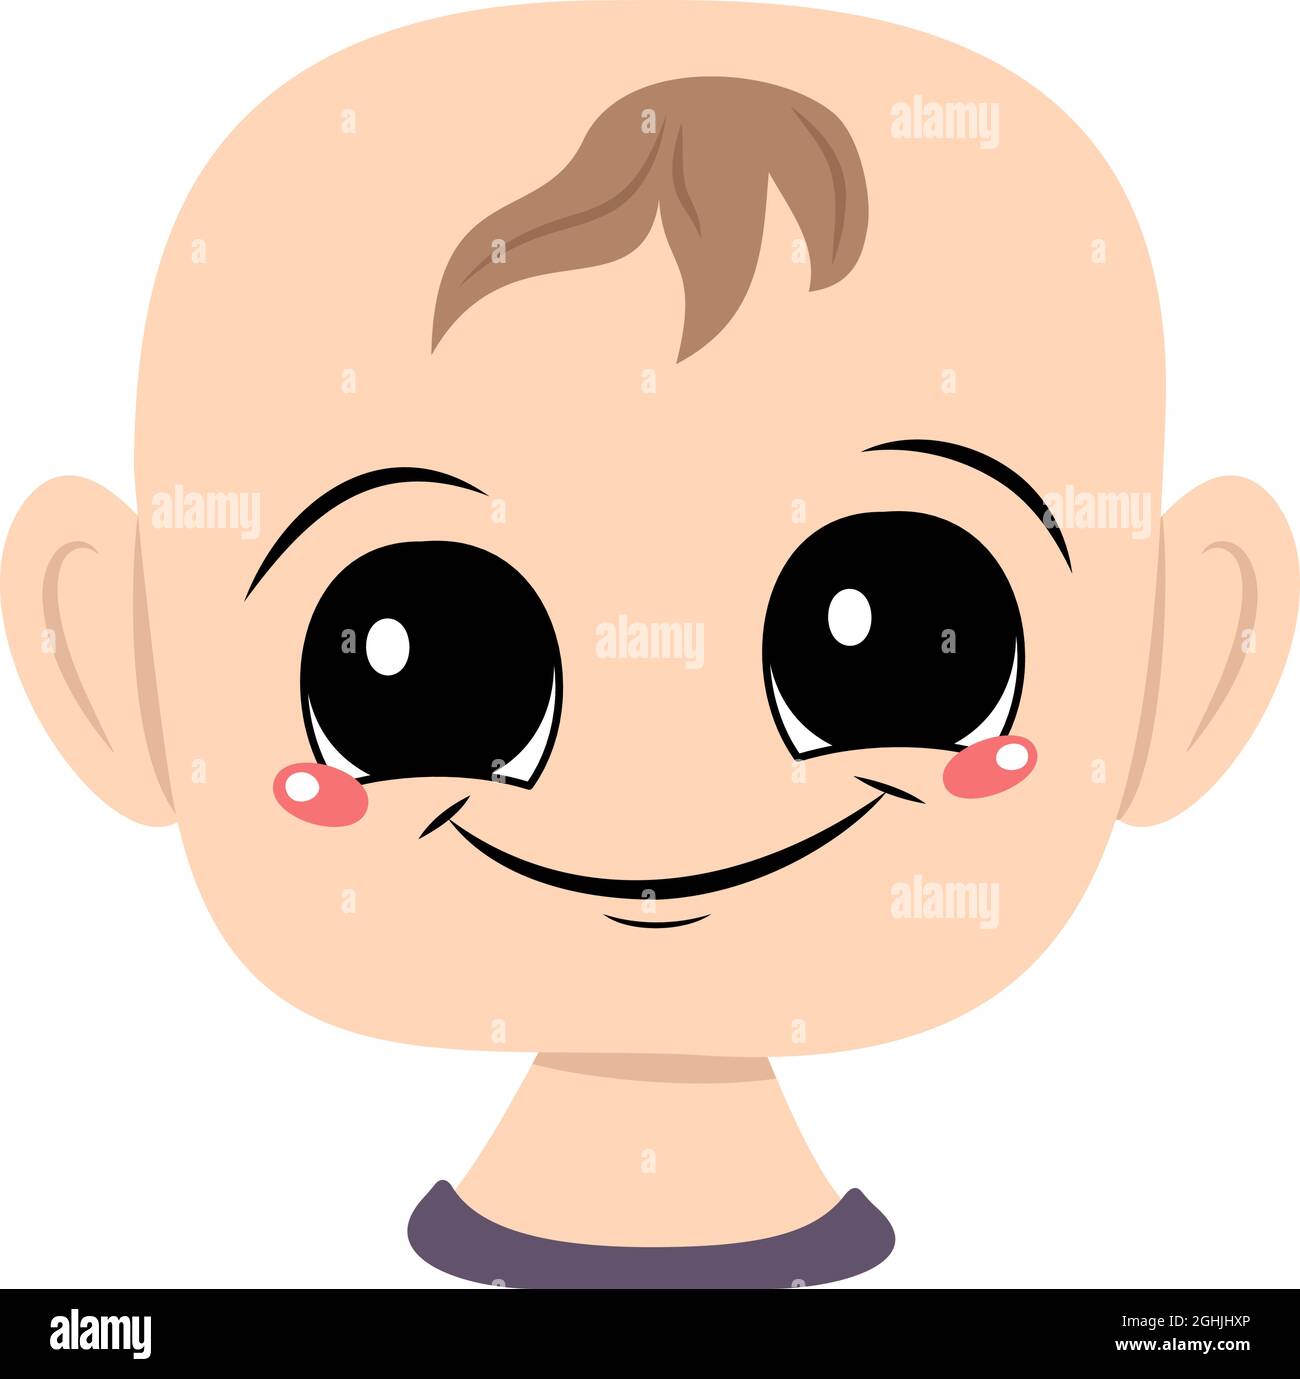 Avatar of a child with big eyes and a wide happy smile. Head of a toddler with a joyful face Stock Vector